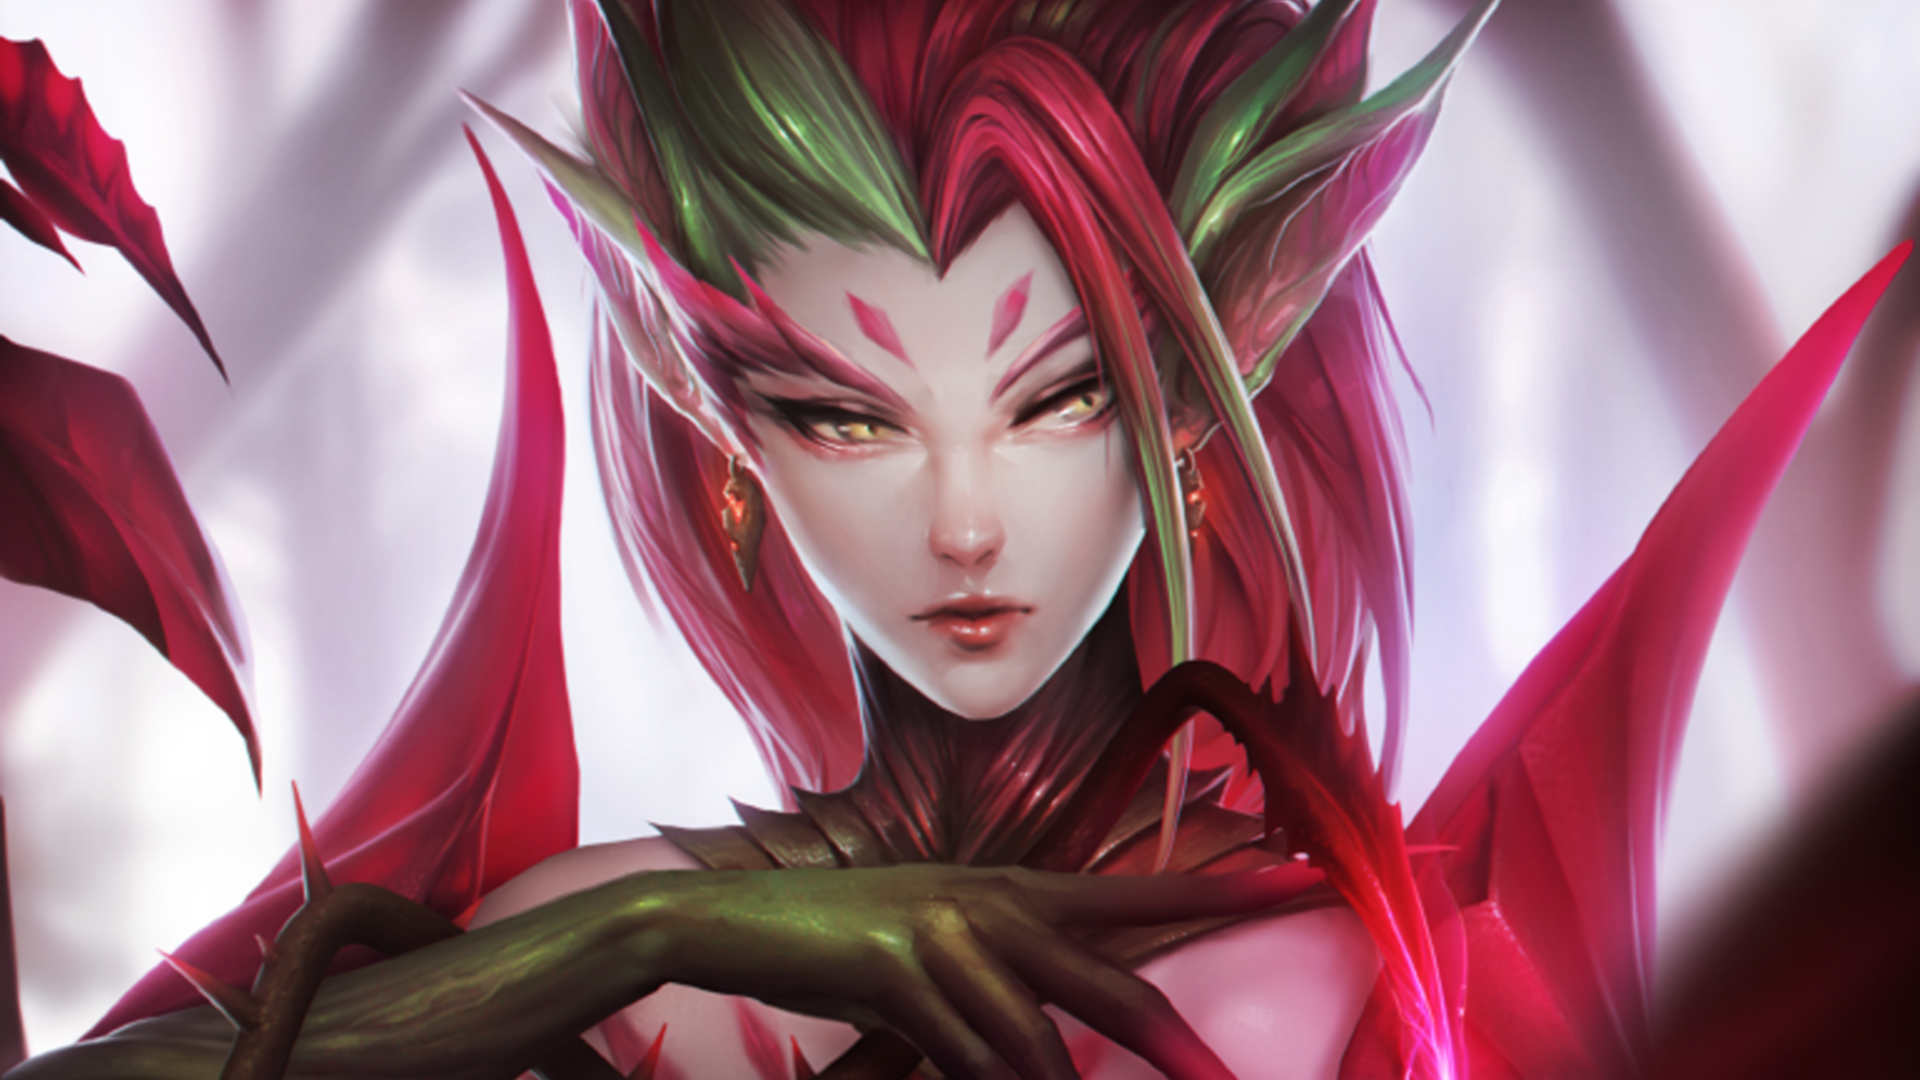 General 1920x1080 League of Legends fantasy girl redhead PC gaming Zyra (League of Legends) video game girls video game characters